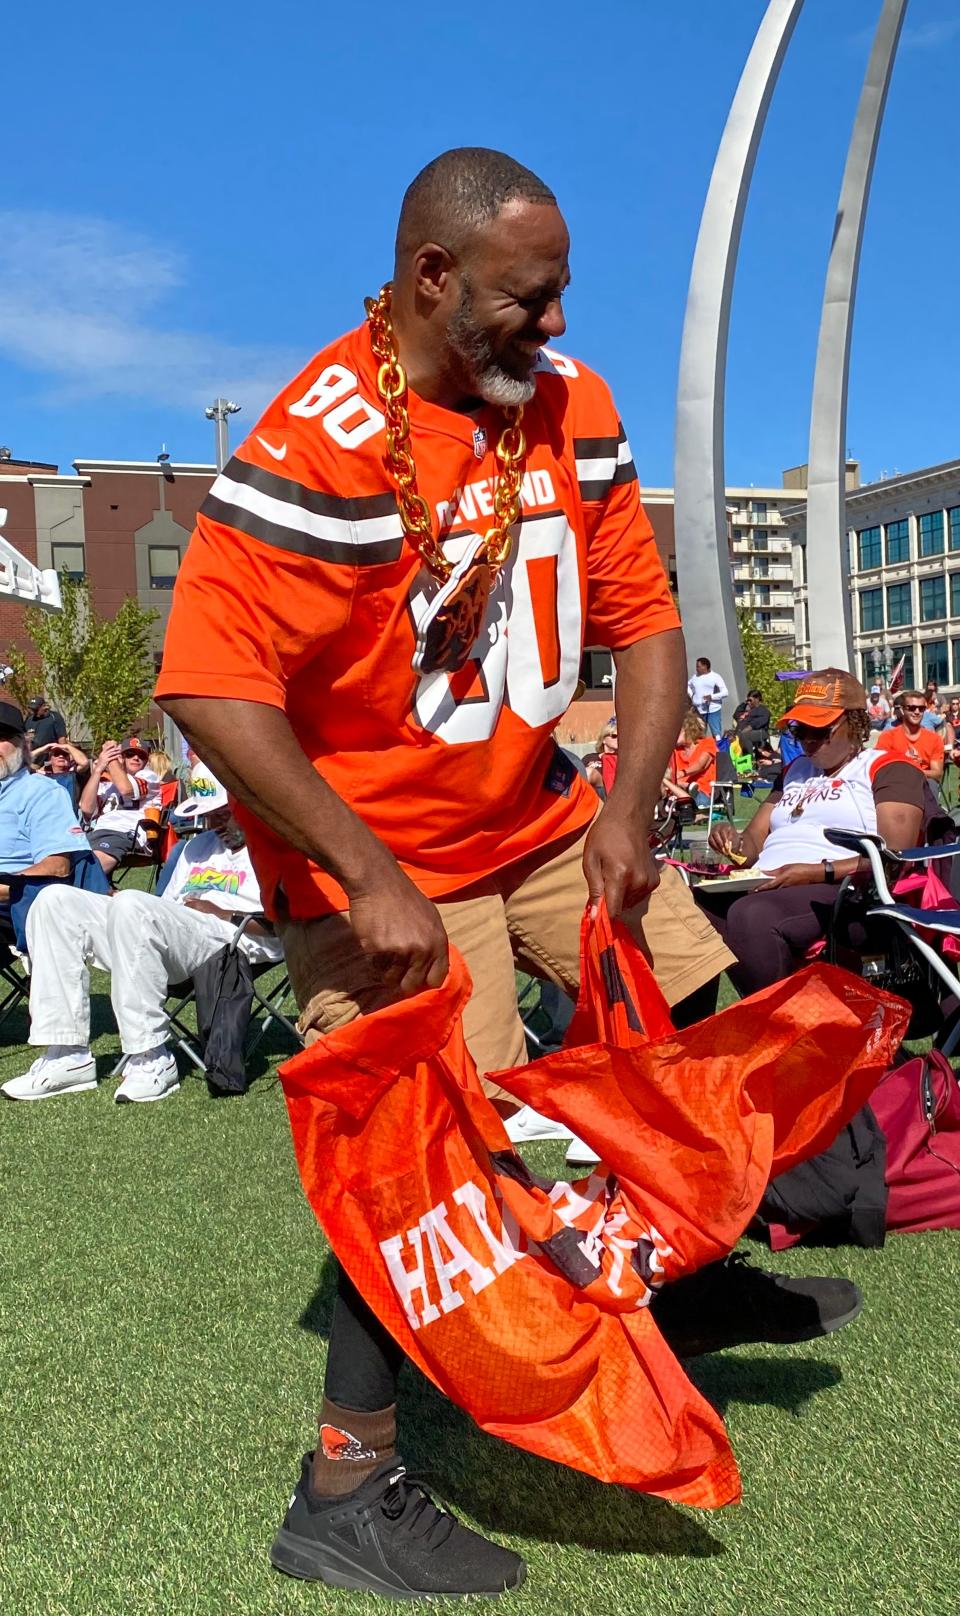 Vincent Jones celebrates during the Cleveland Browns game last season against the Chicago Bears in September. Centennial Plaza in downtown Canton is a popular spot to watch Browns and Ohio State Buckeye games on a large video screen.